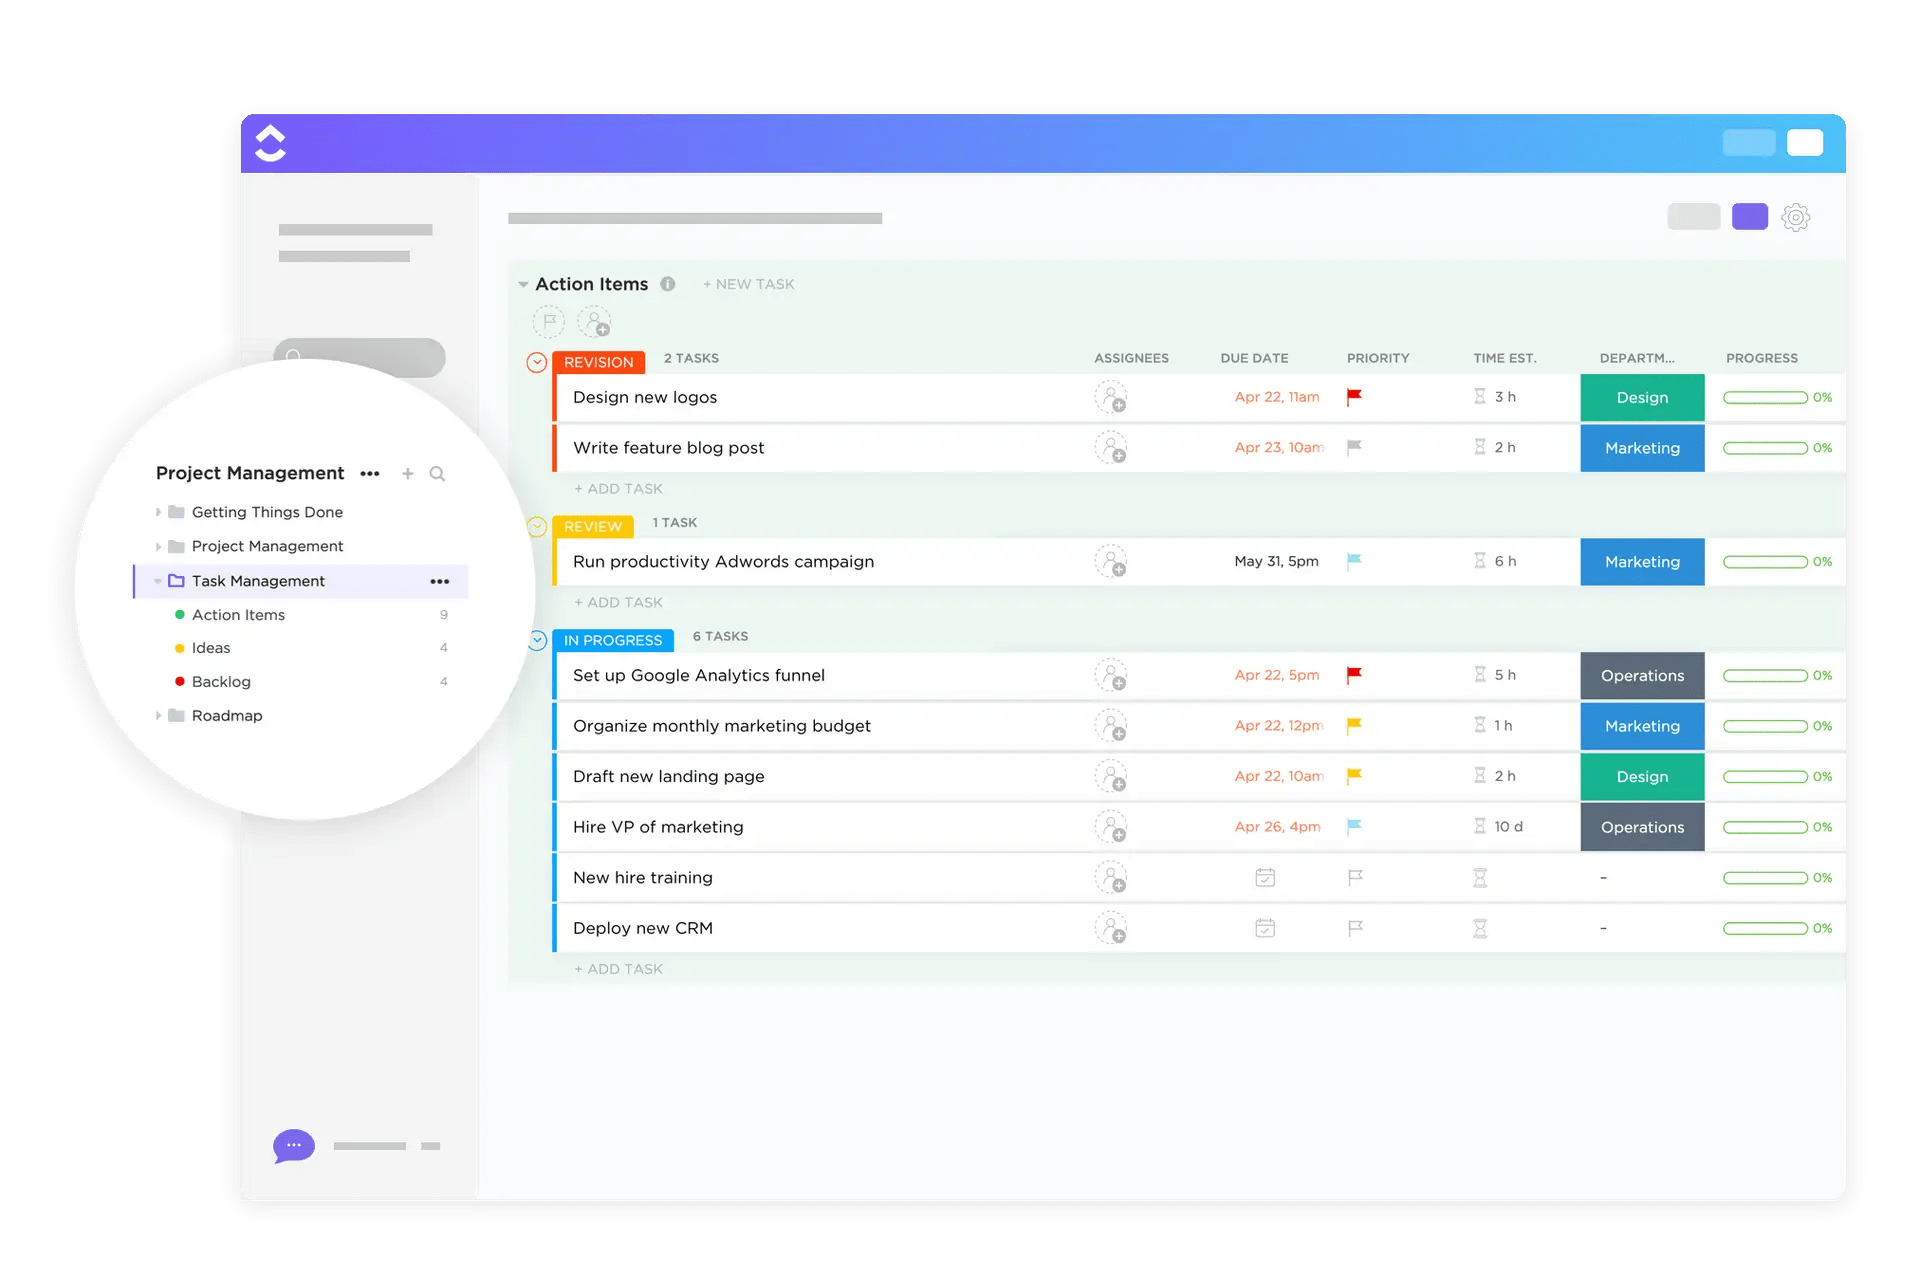 Stay organized by automatically grouping information by priority, task status, and department using ClickUp's Task Management Template